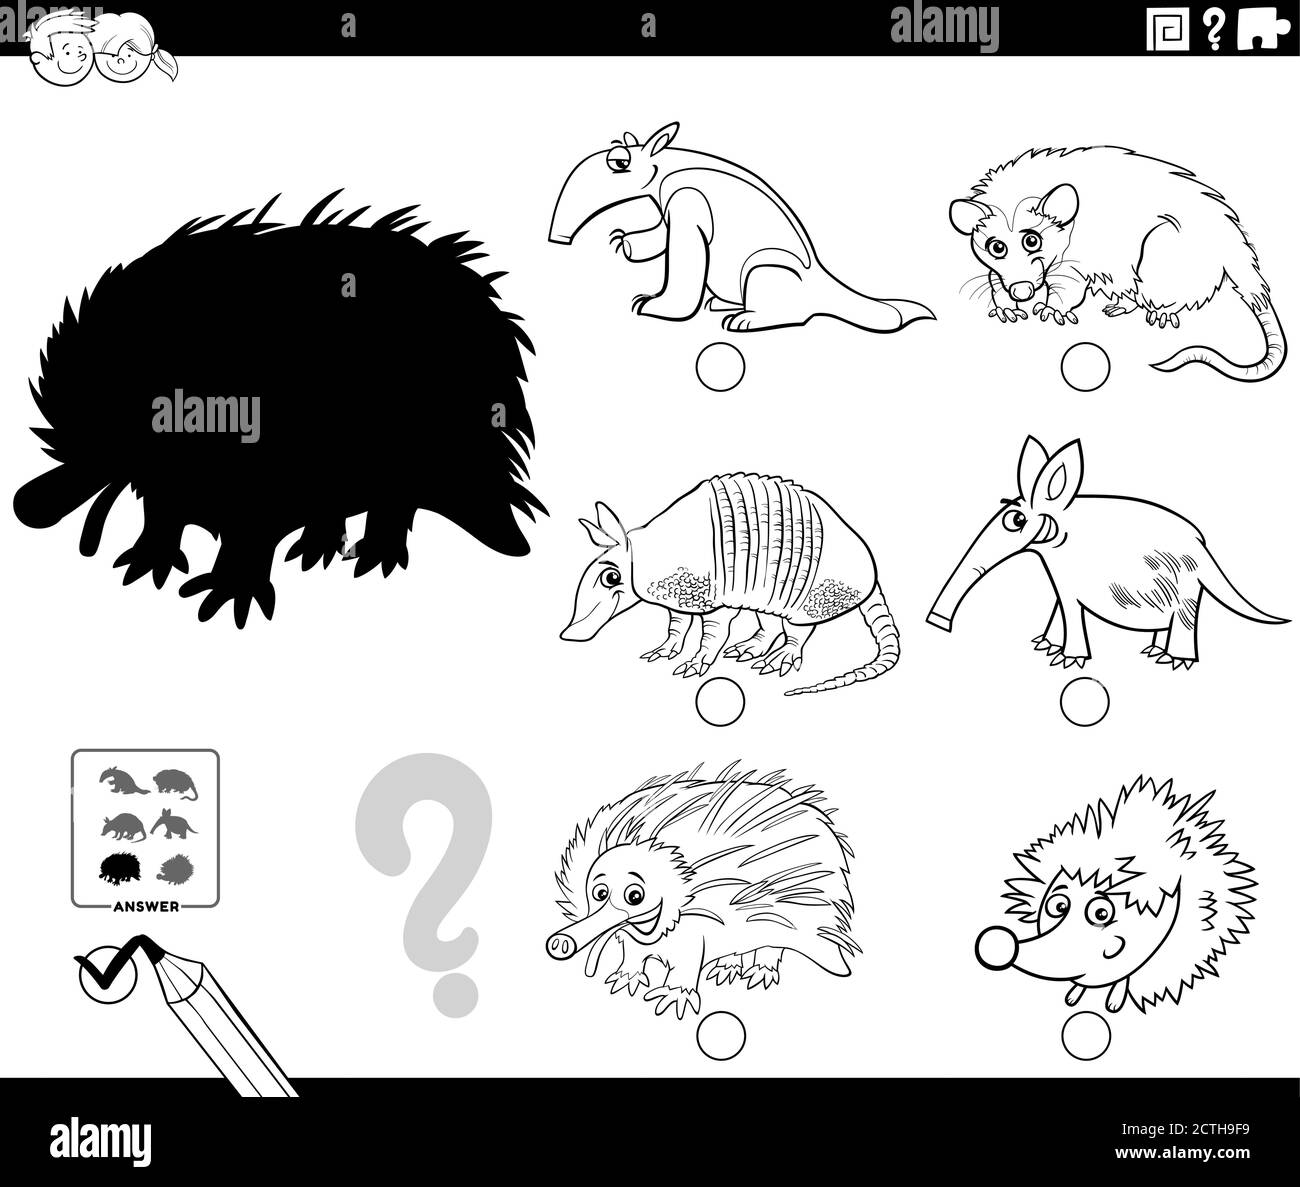 Black and White Cartoon Illustration of Finding the Right Picture to the Shadow Educational Task for Children with Wild Animal Characters Coloring Boo Stock Vector